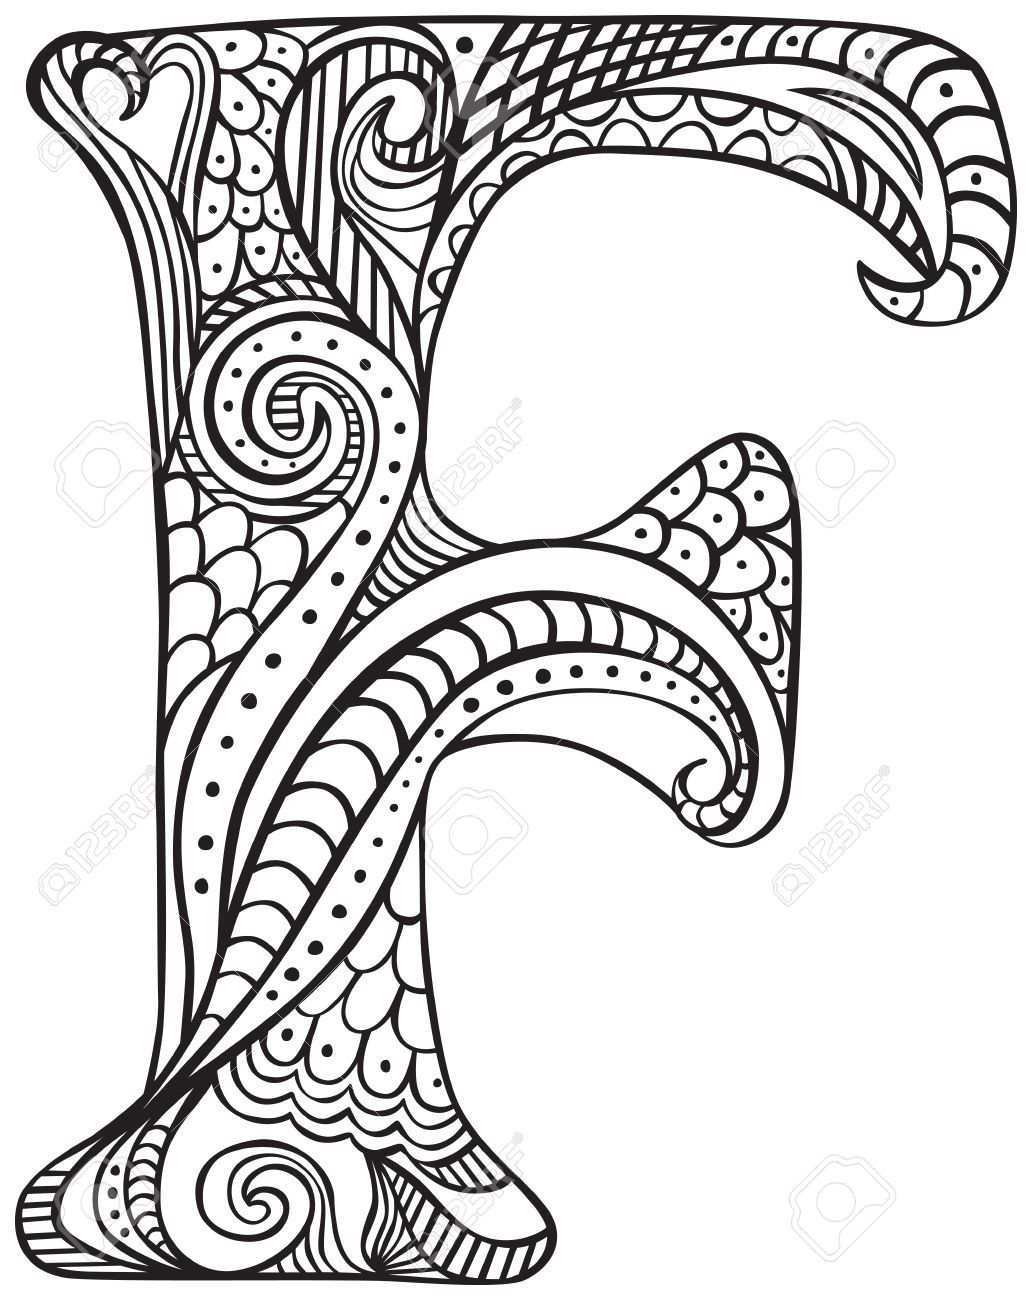 Hand Drawn Capital Letter F In Black Coloring Sheet For Adults Stock Vector 55502921